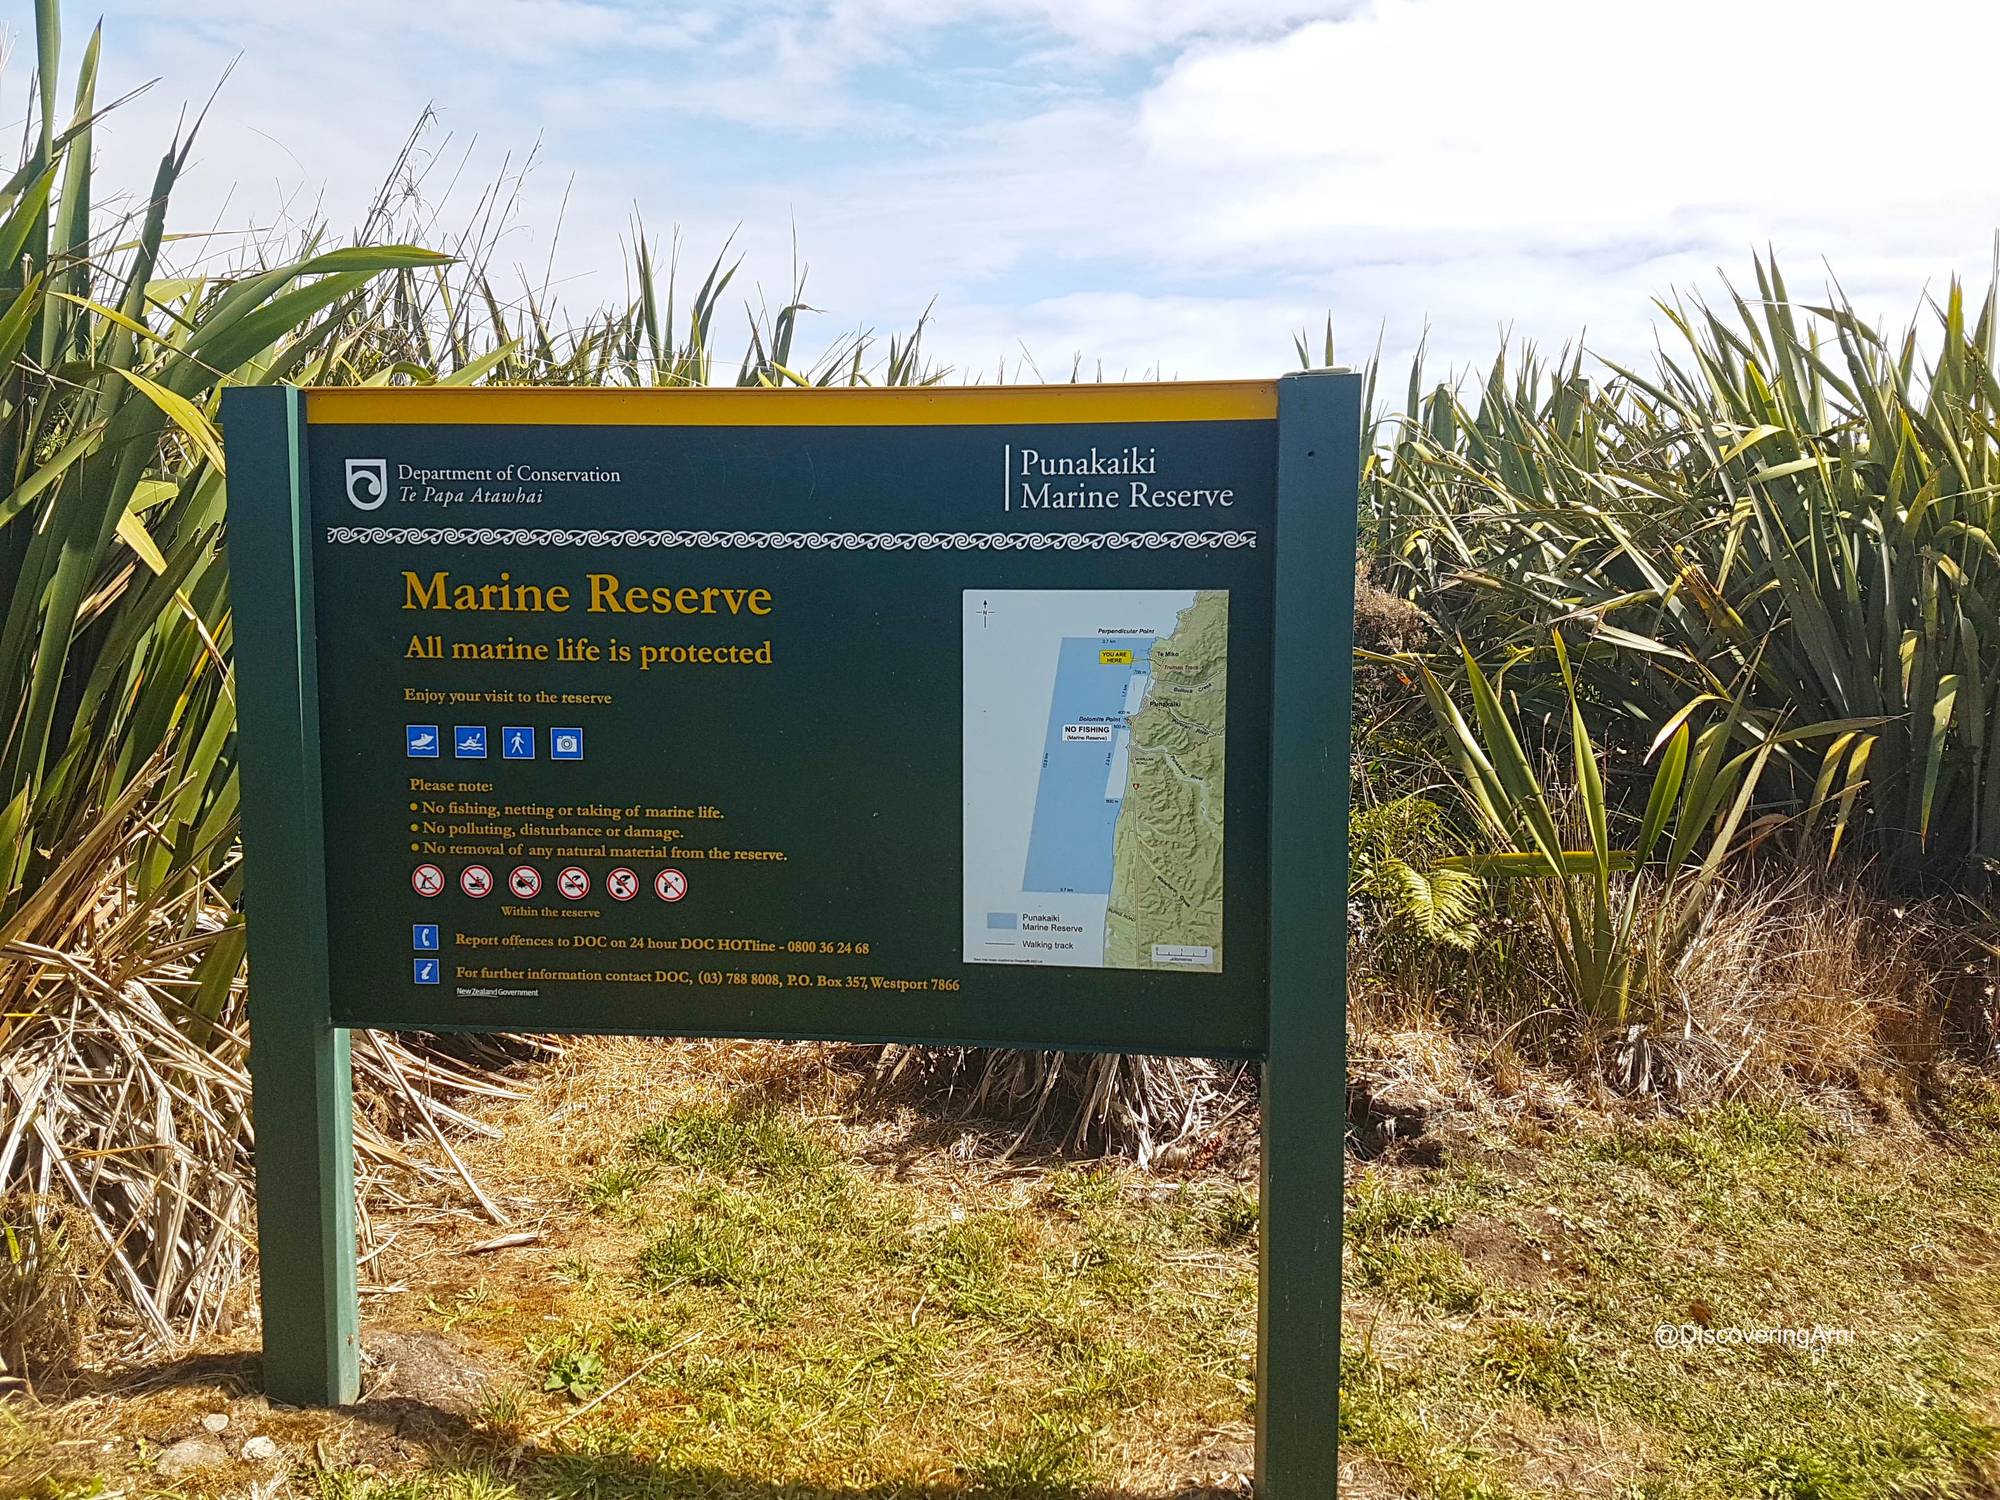 Starting point of the Marine Reserve along the Truman Track